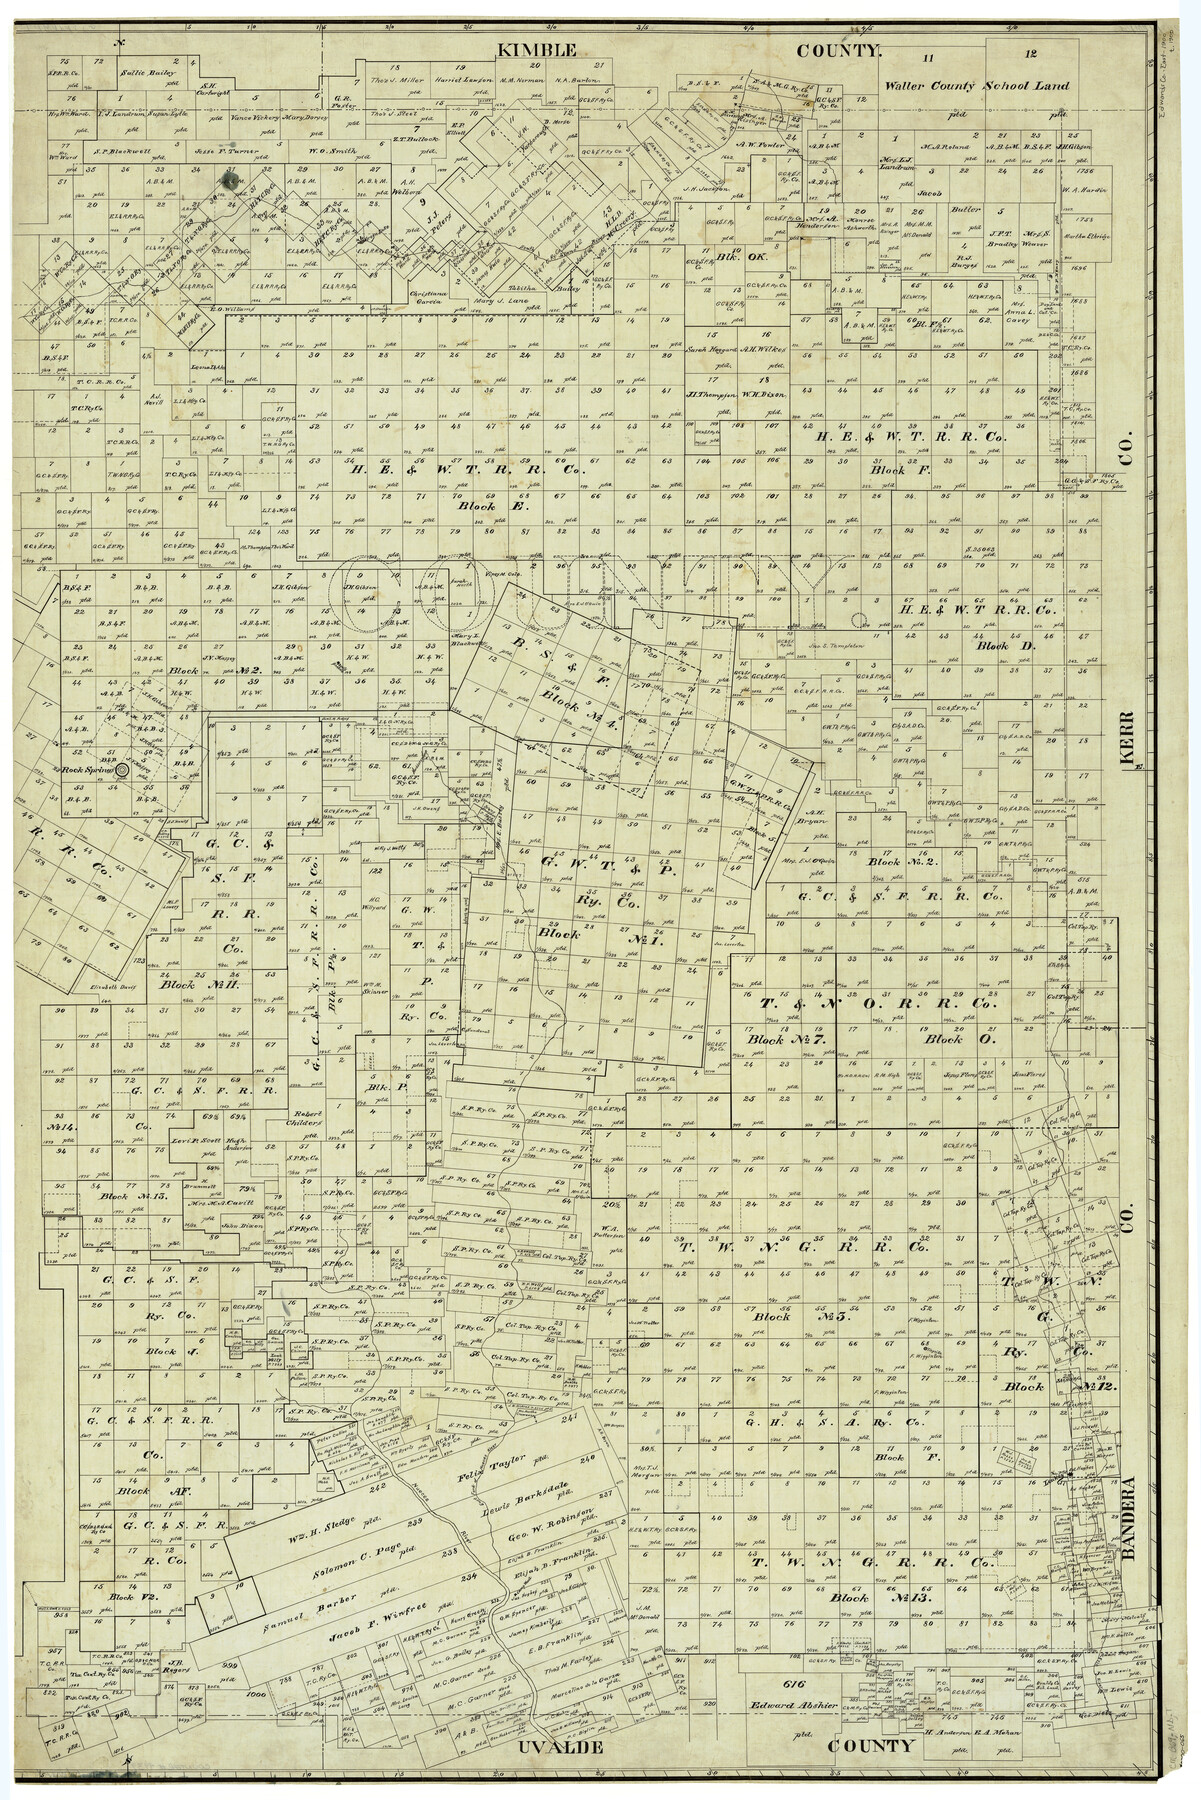 4939, [Edwards County], General Map Collection